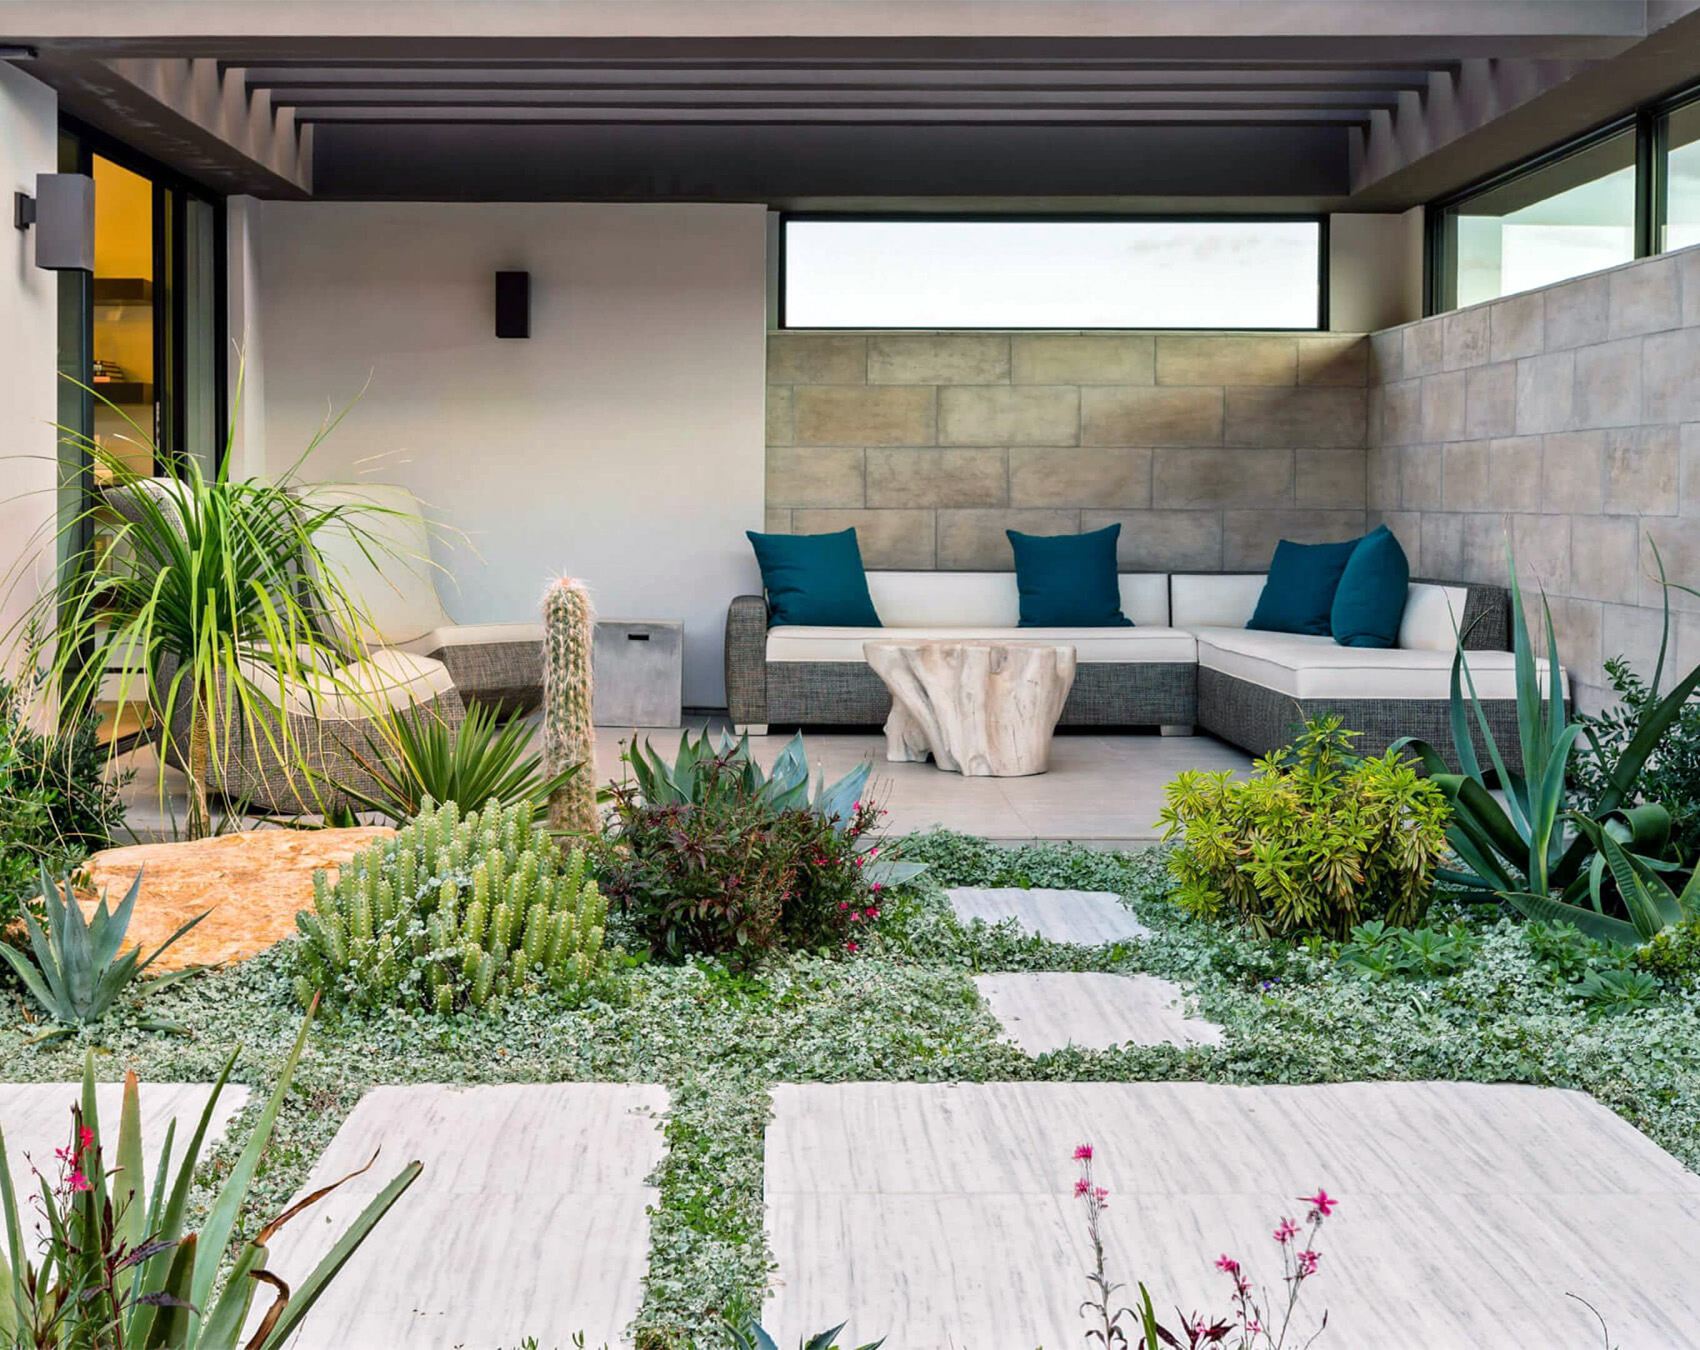 tiled retaining walls outdoor seating area and walkway